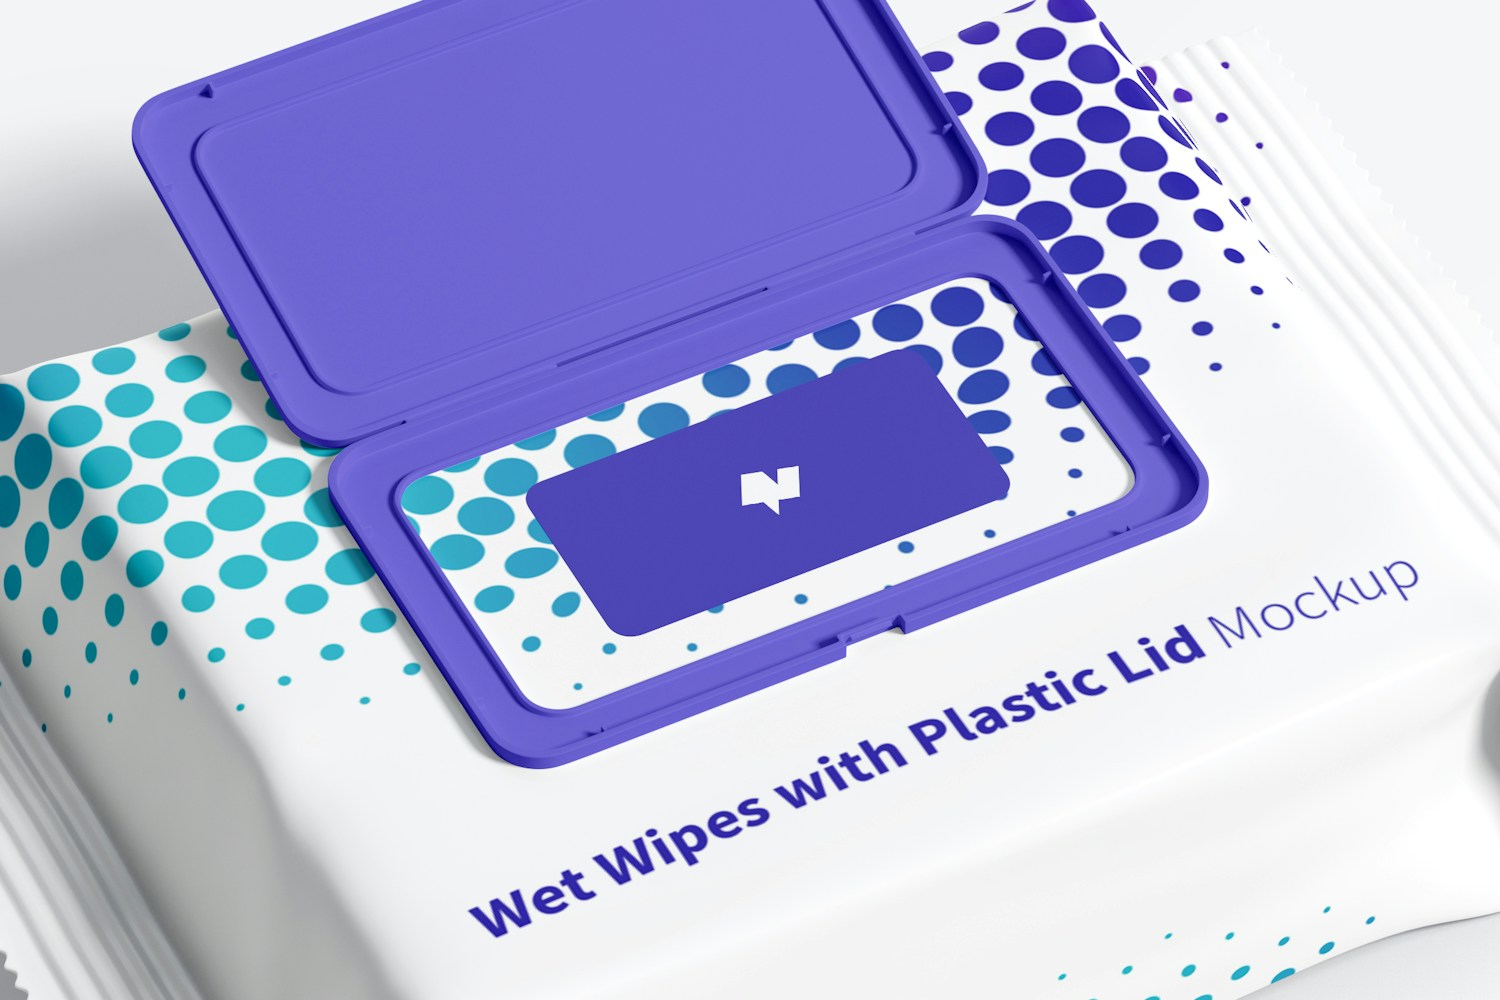 Wet Wipes Large Packaging with Plastic Lid Mockup, Top View